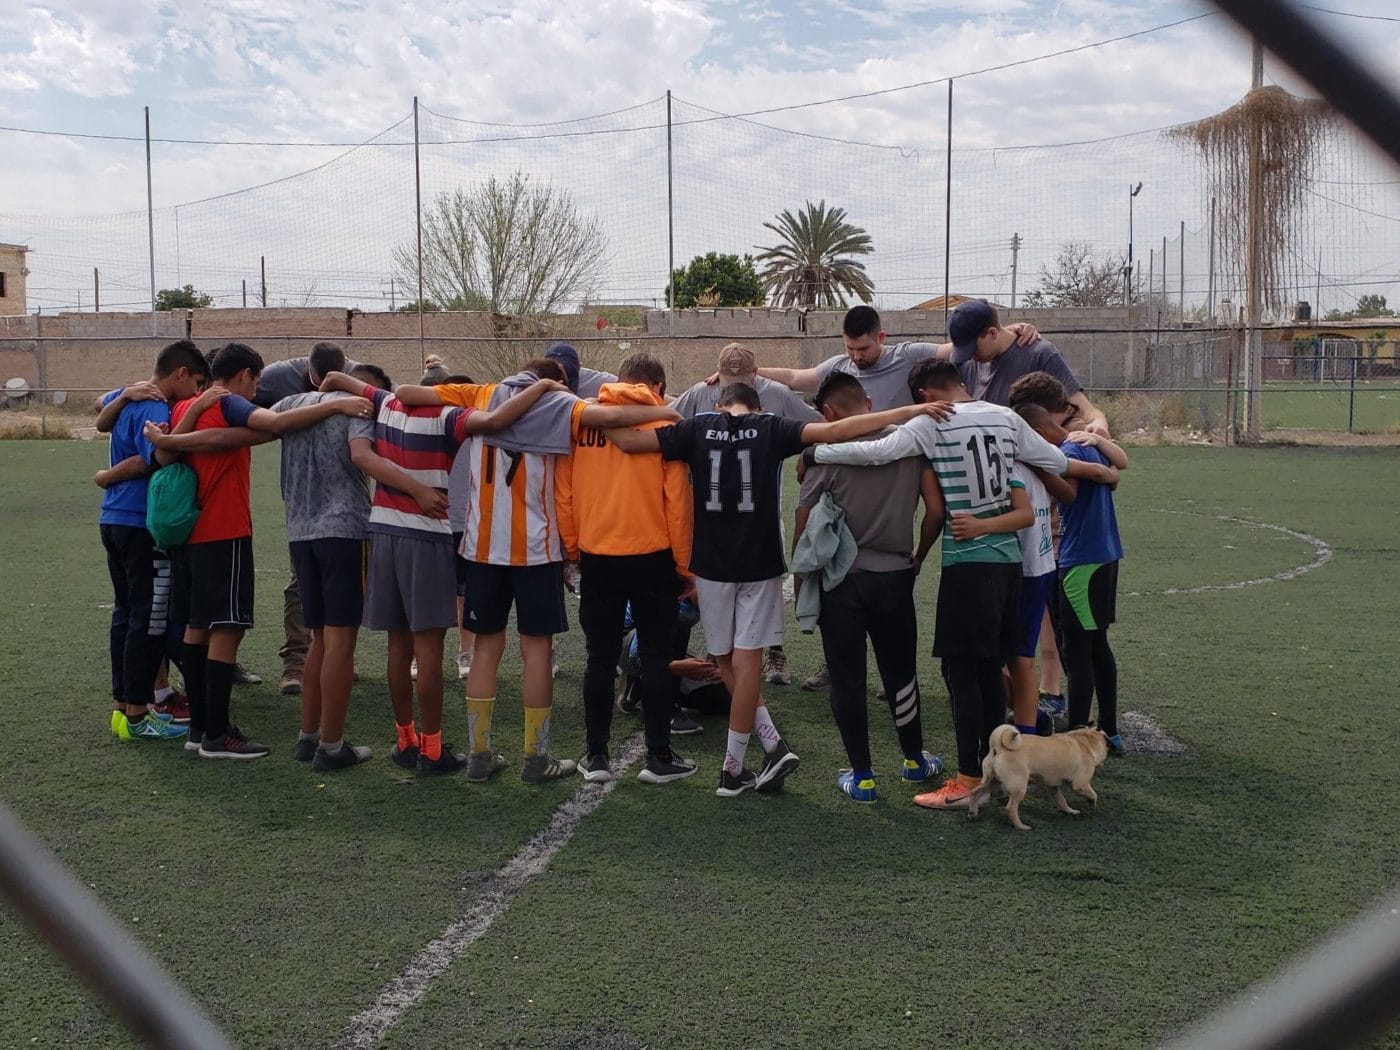 A group of young men from San Pedro standing together after a soccer game